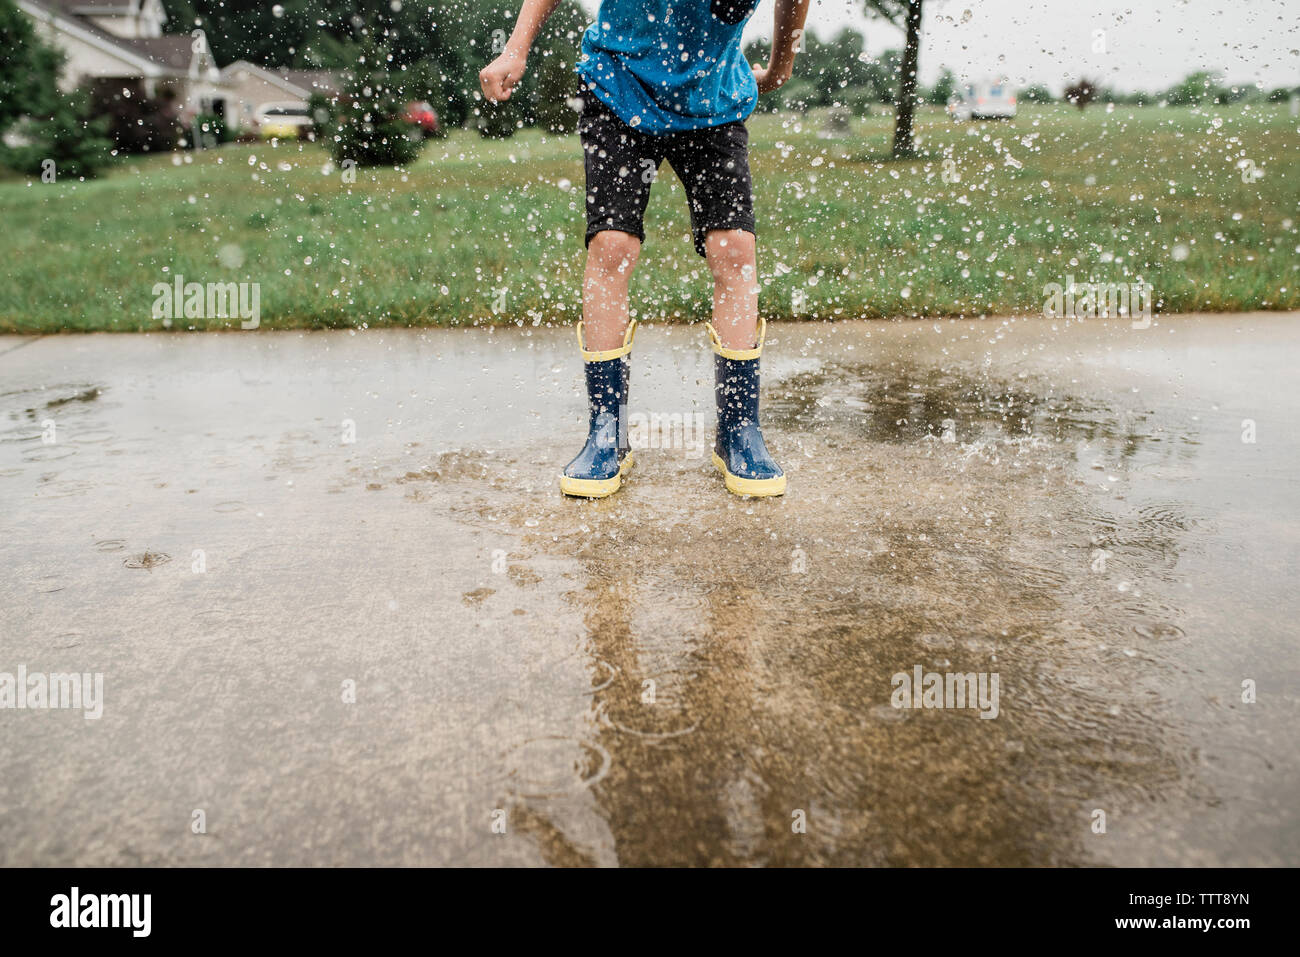 Low section of playful boy stamping feet in puddle on road during monsoon Stock Photo